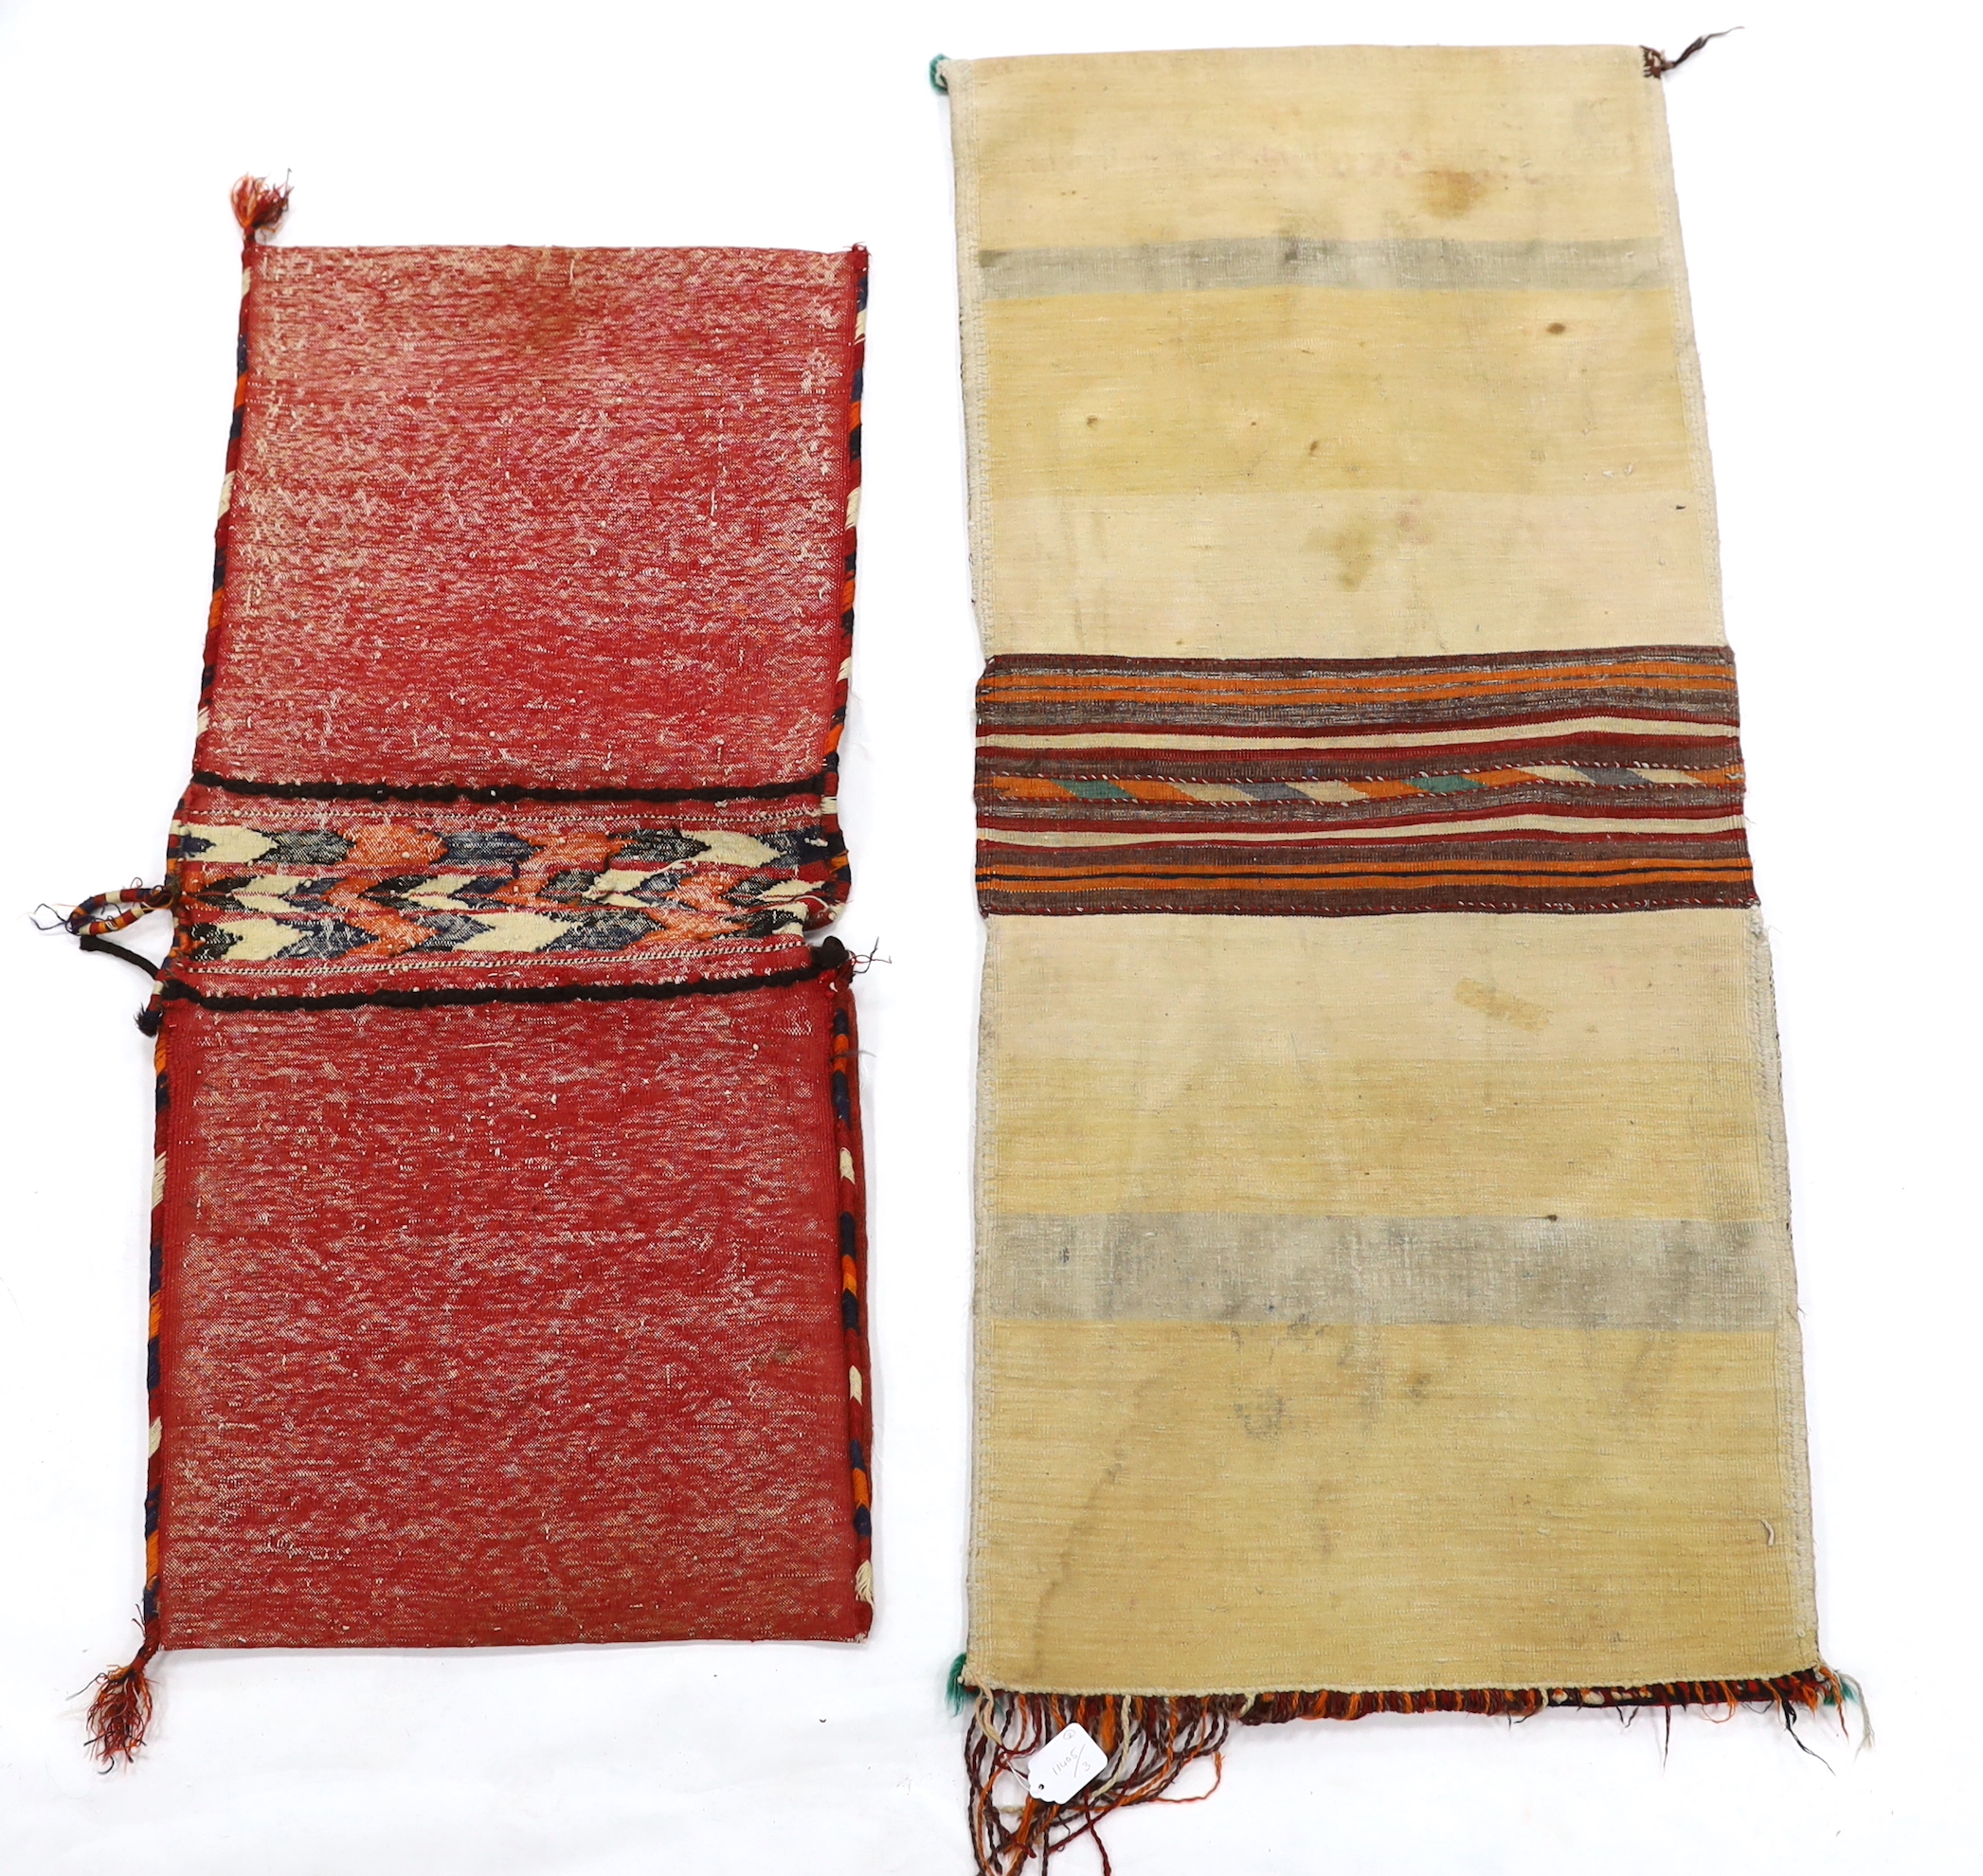 Two late 19th / early 20th century Caucasian saddle bags, largest 132cm long x 59cm wide